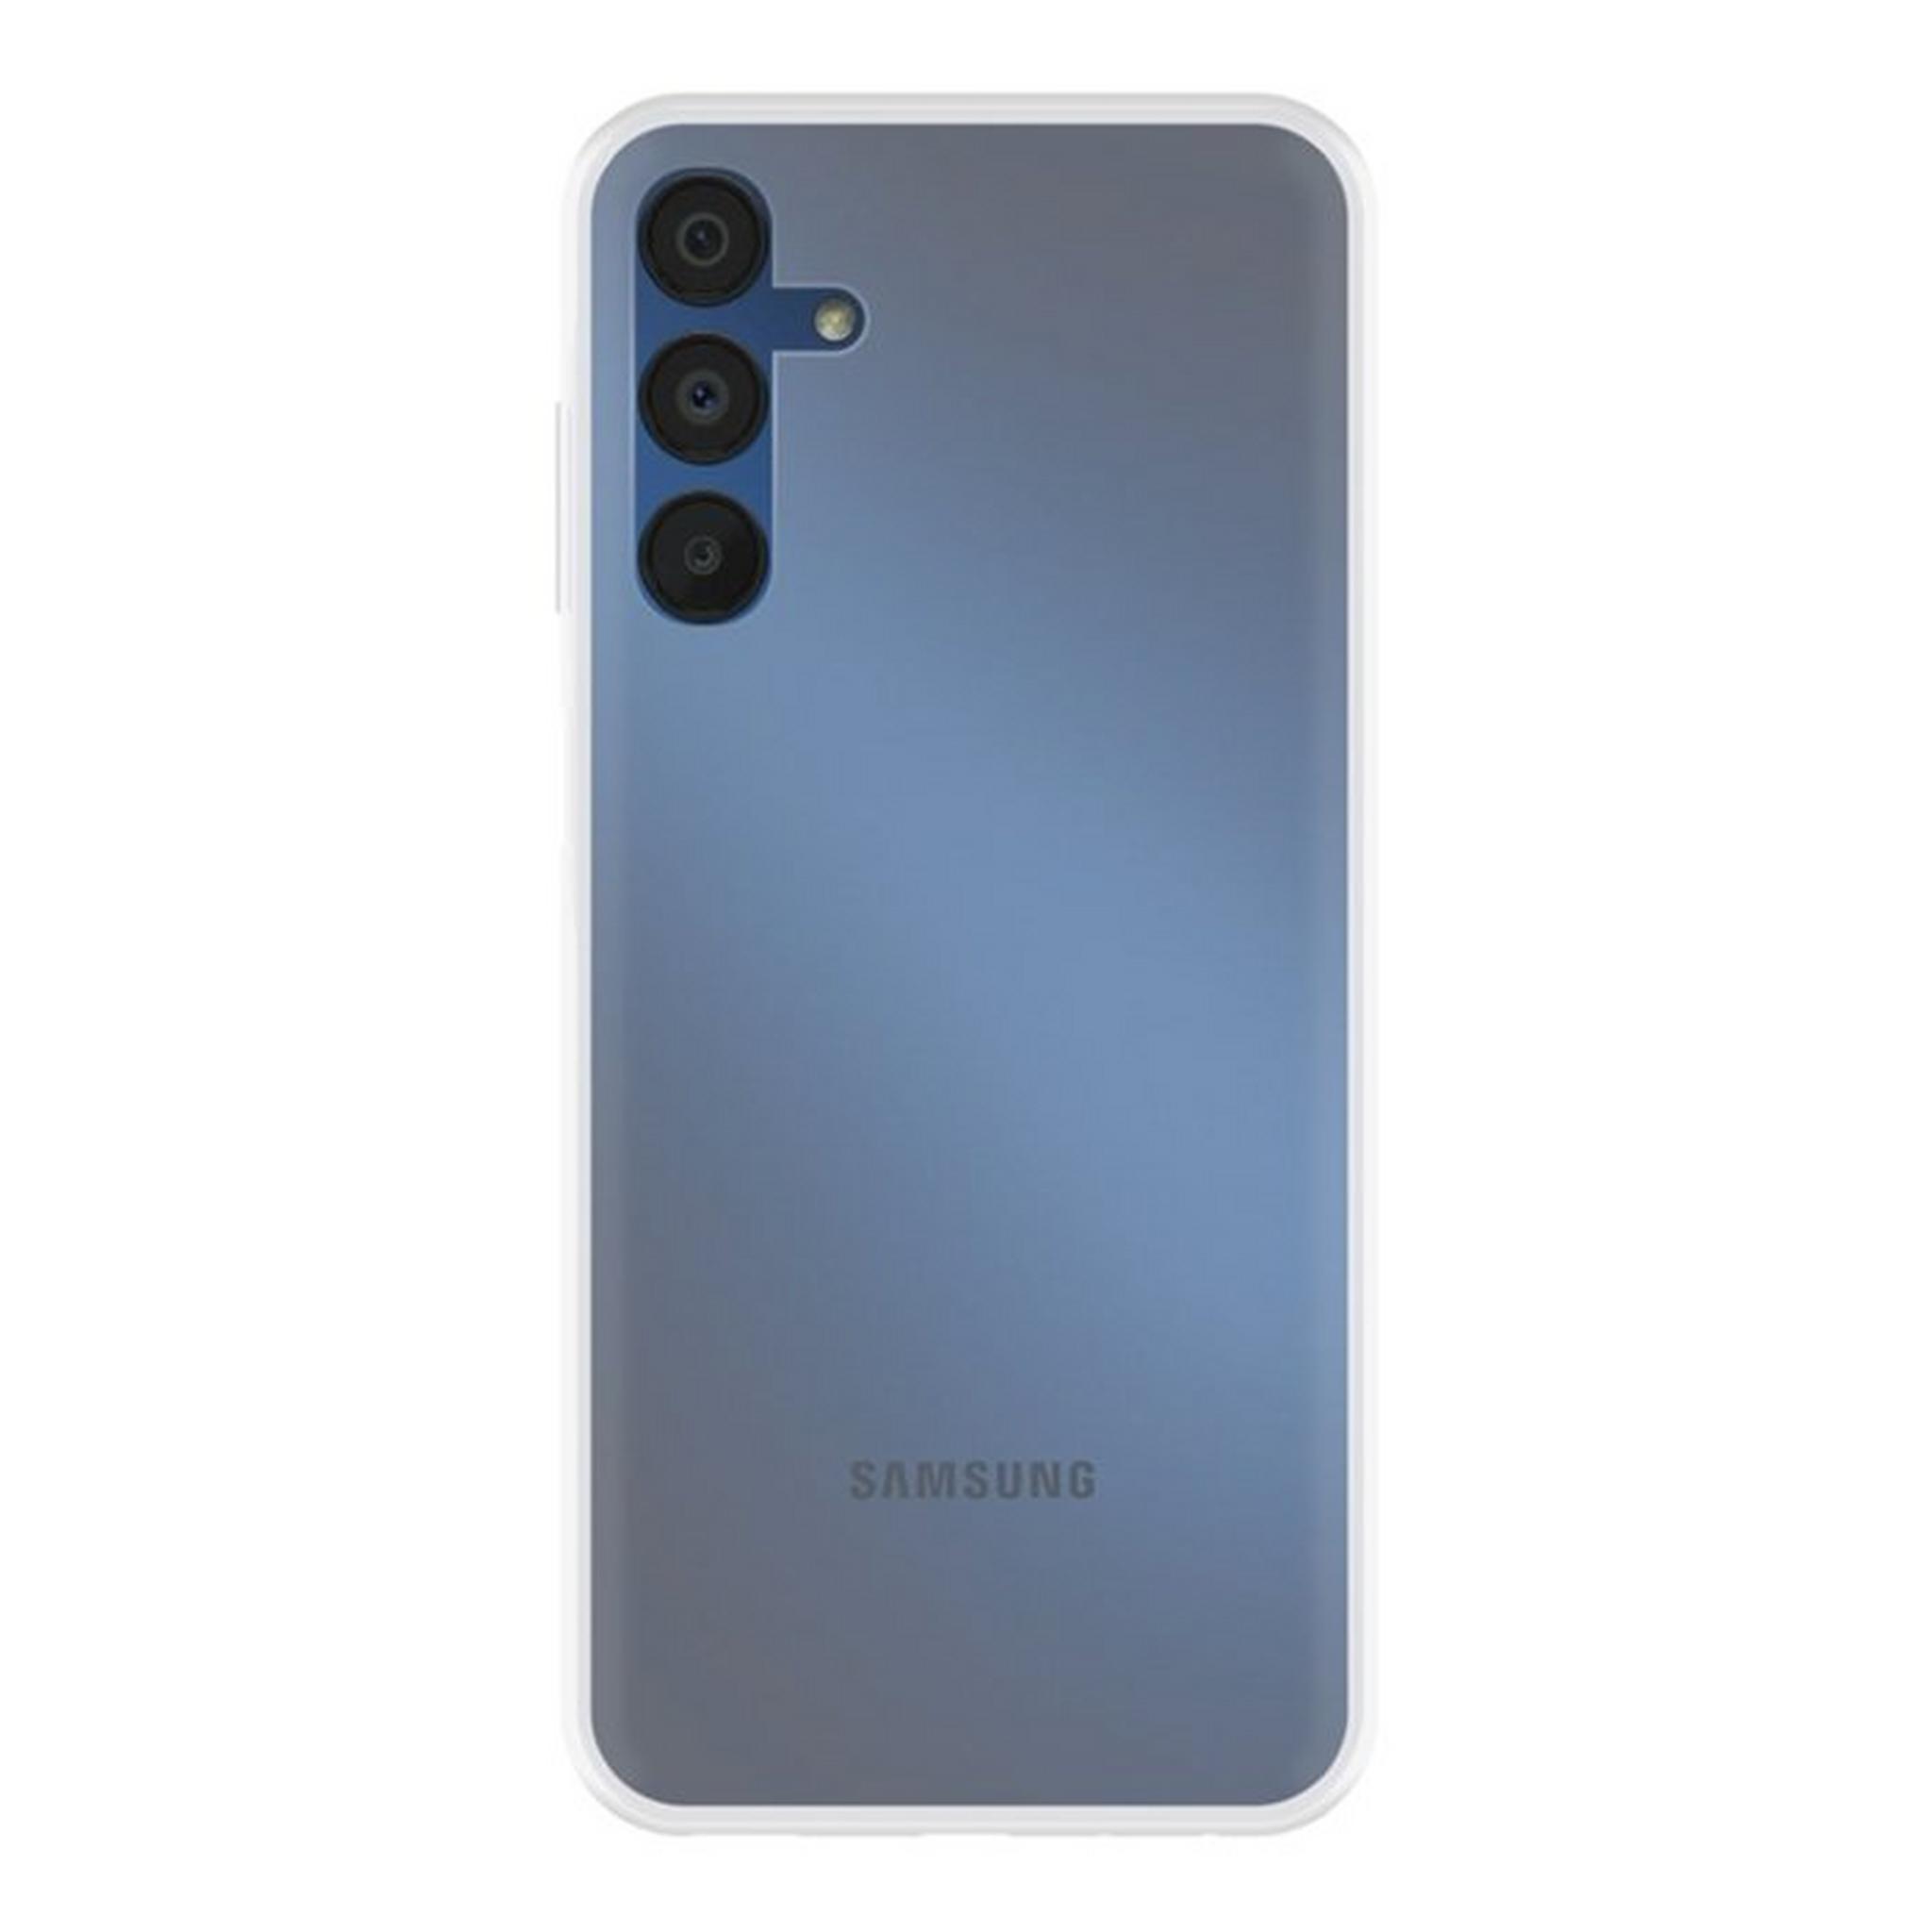 Just in Case Soft TPU Case for Samsung Galaxy A15, 8327116 – Clear